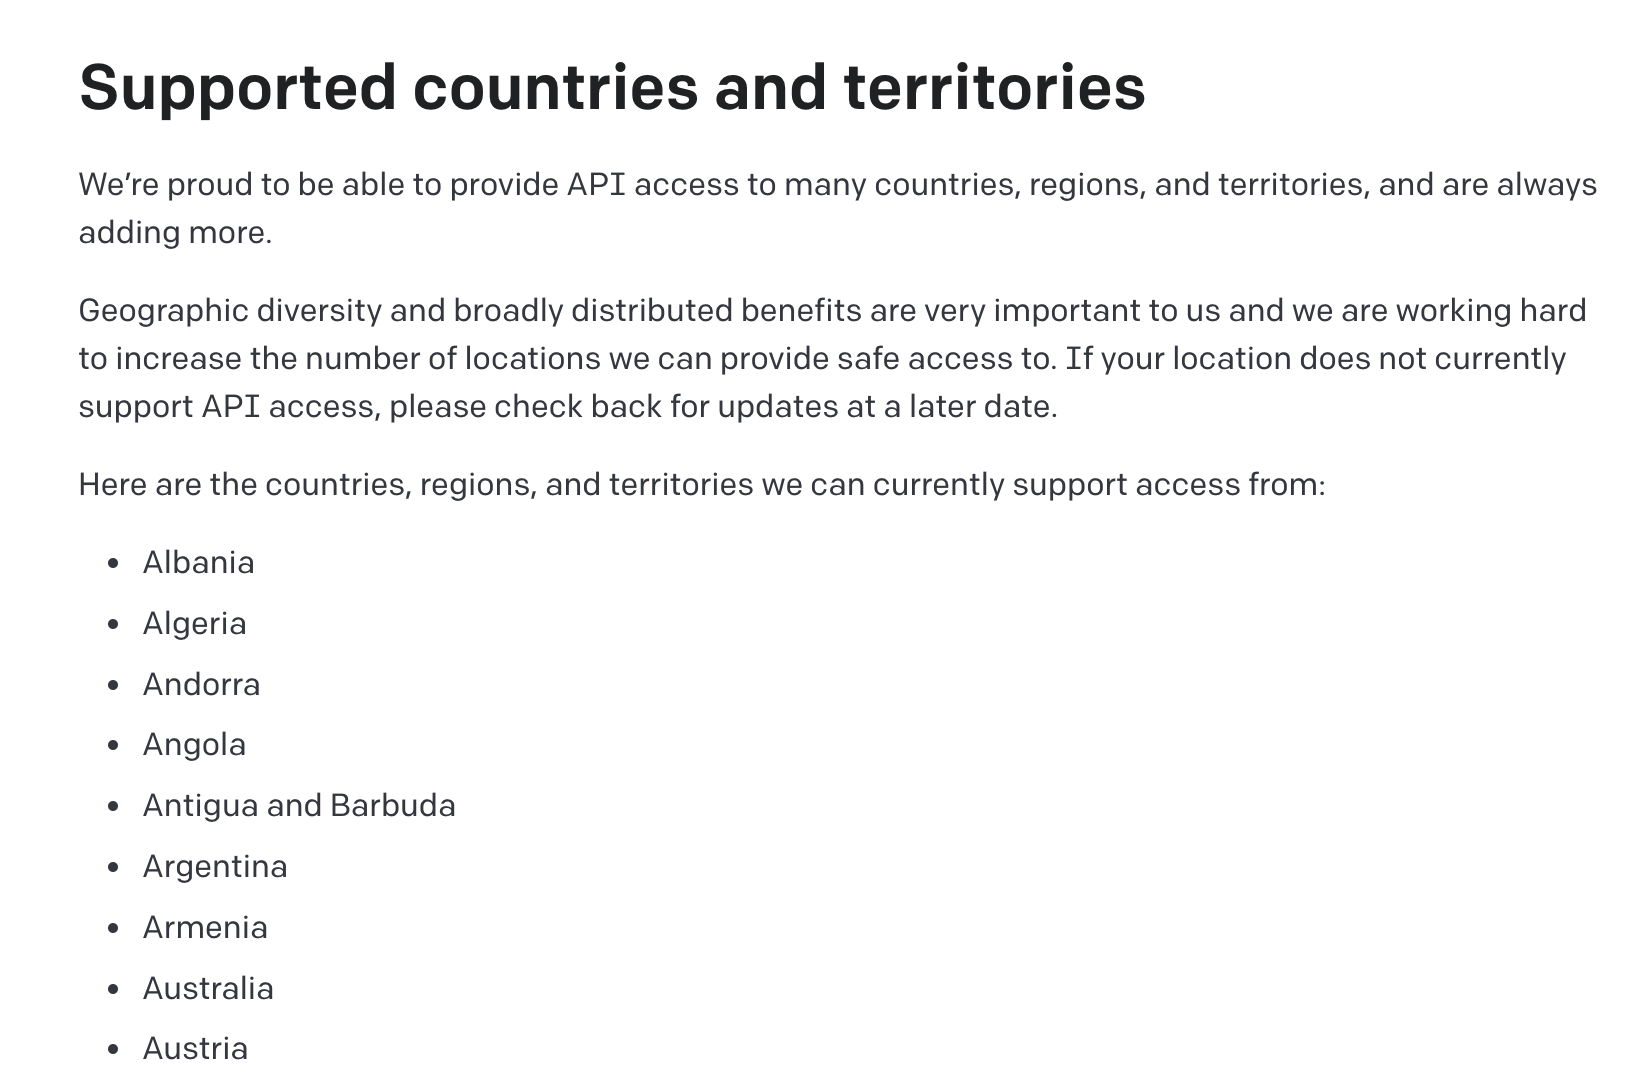 OpenAI's complete list of supported countries and terrorites 